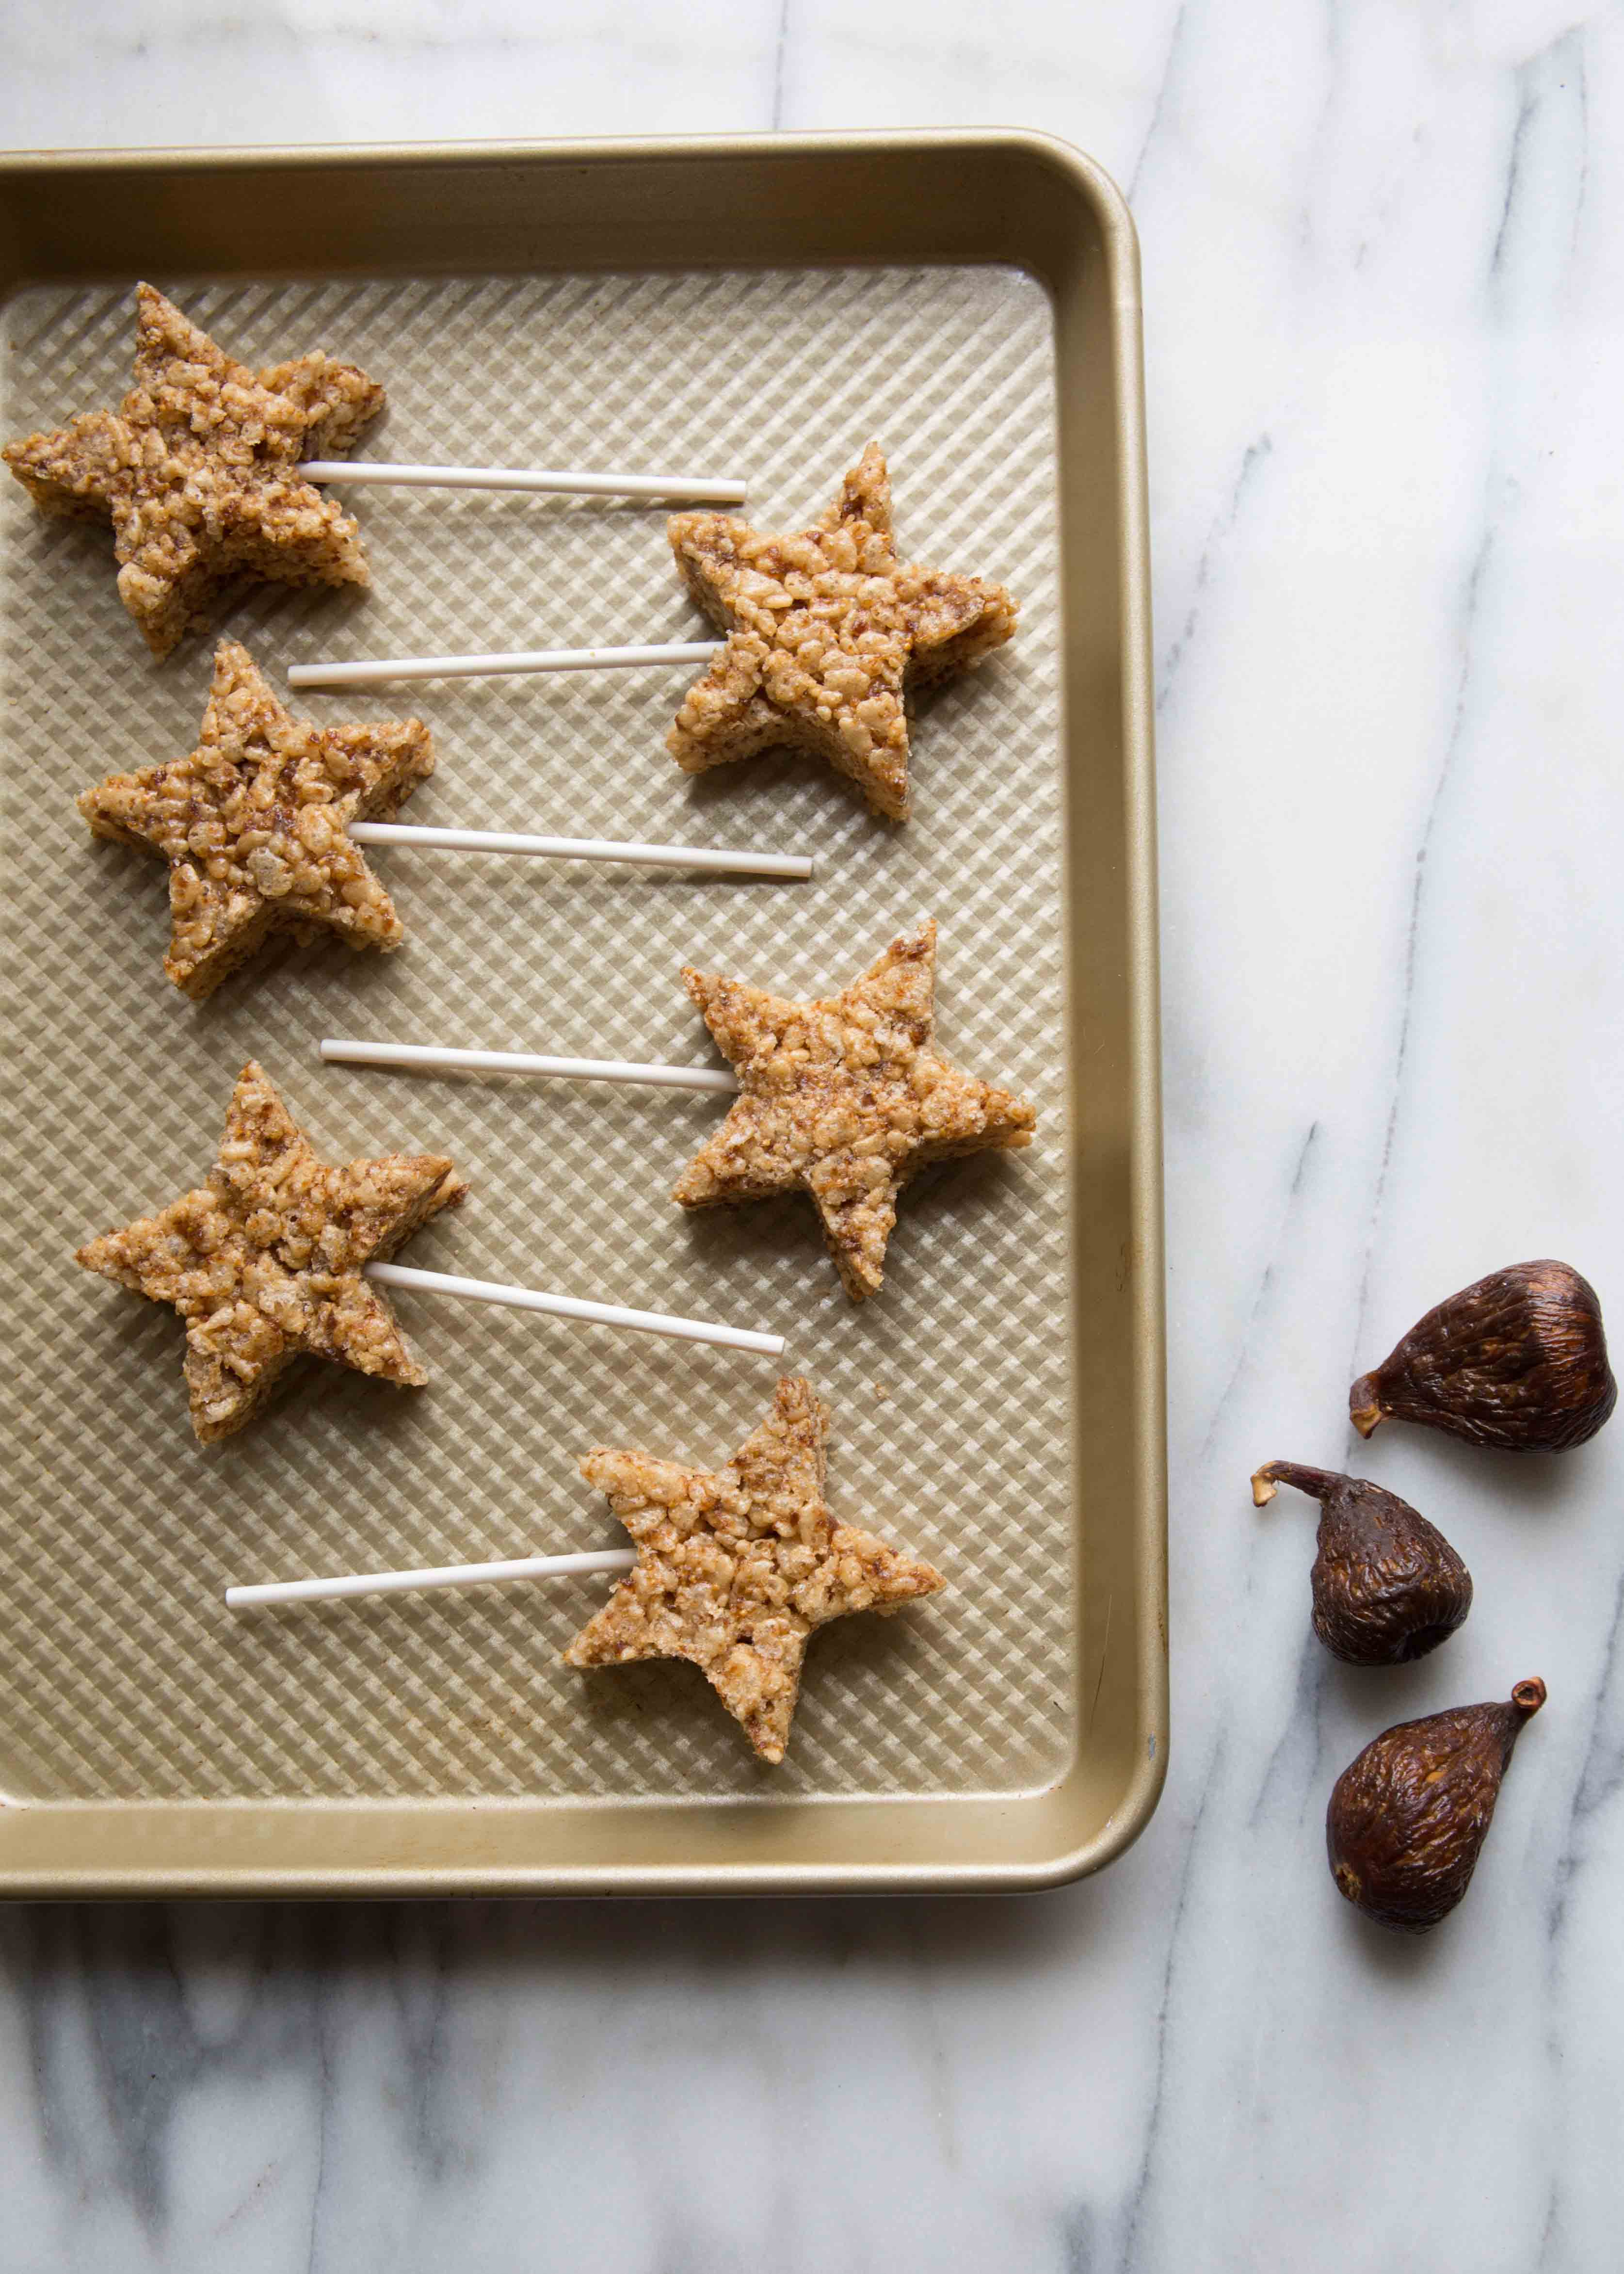 Use cookie cutters to stamp out crispy rice pops that invite a fun twist on a classic treat.